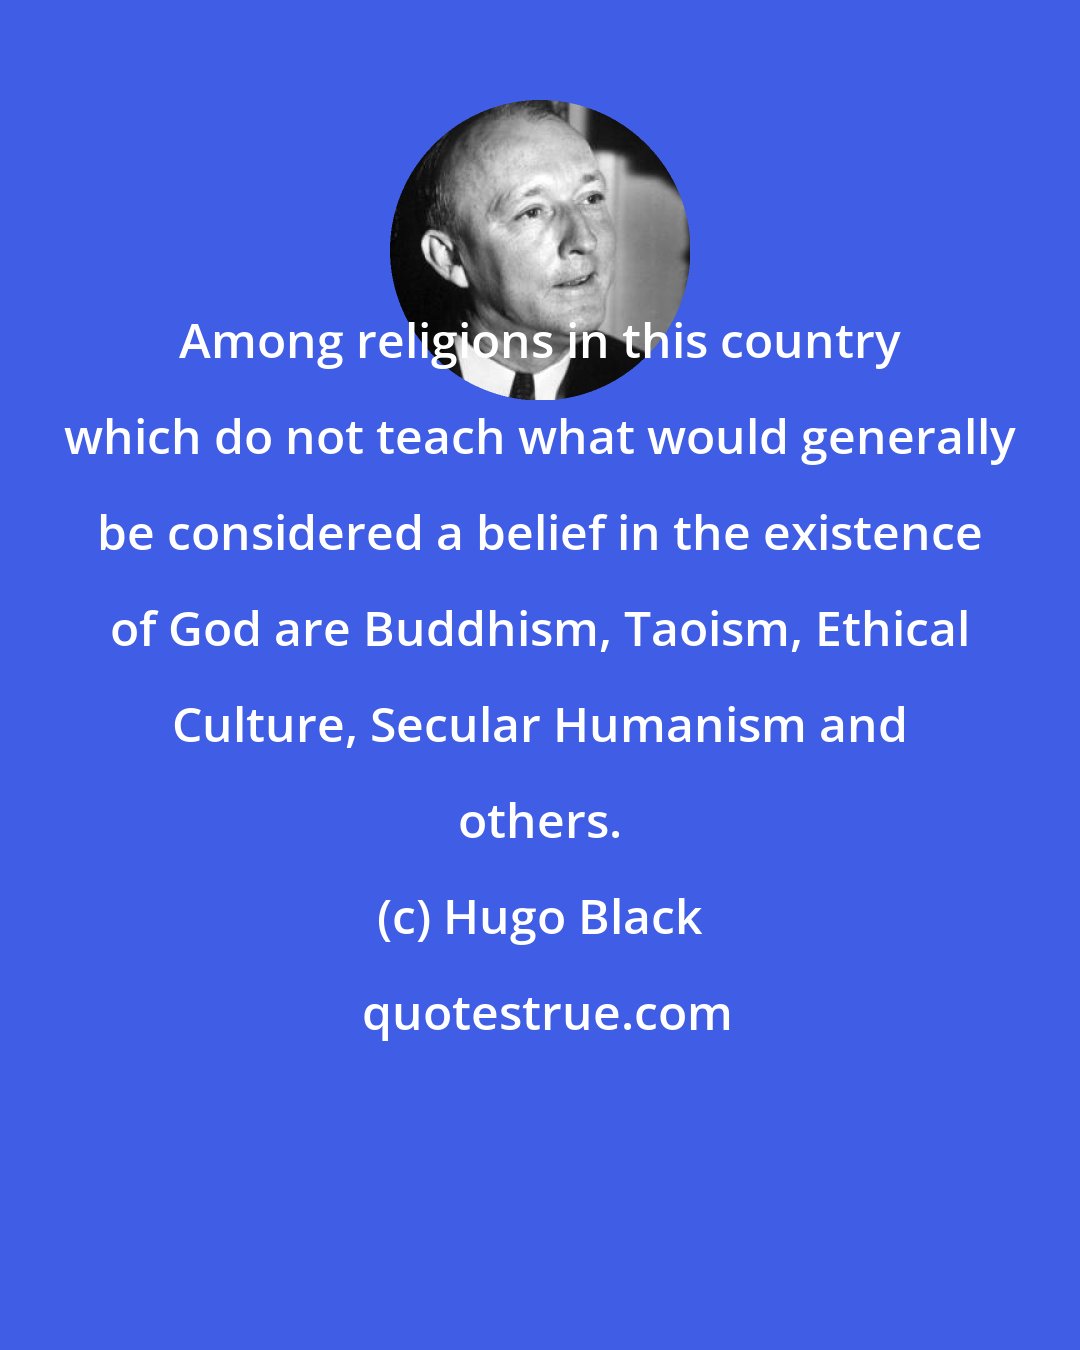 Hugo Black: Among religions in this country which do not teach what would generally be considered a belief in the existence of God are Buddhism, Taoism, Ethical Culture, Secular Humanism and others.